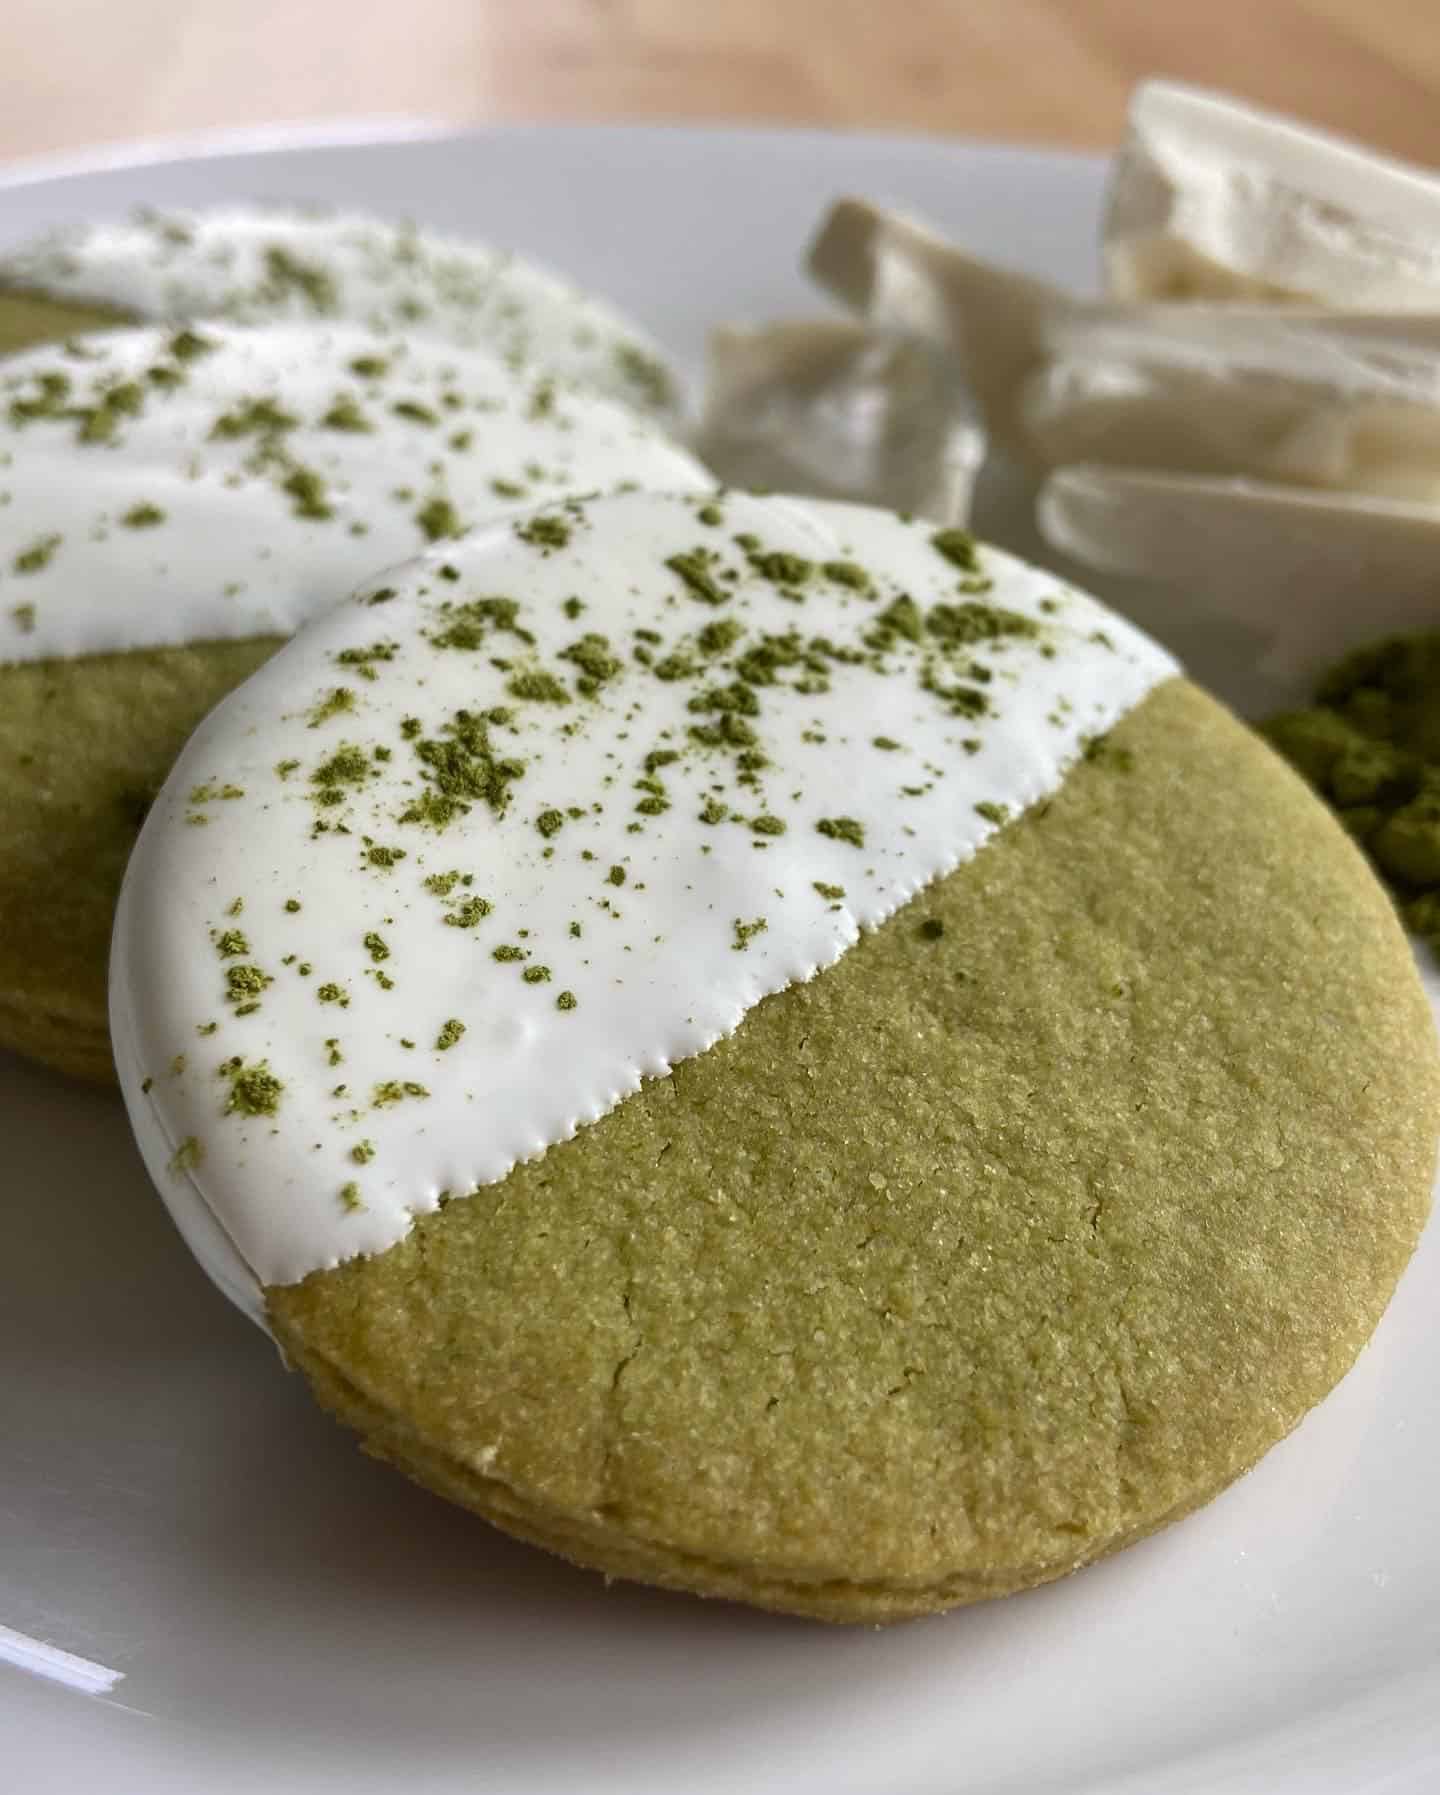 Macha shortbread cookies from Sweet Sam Bakes are dipped in white chocolate. Press photo courtesy of the artist